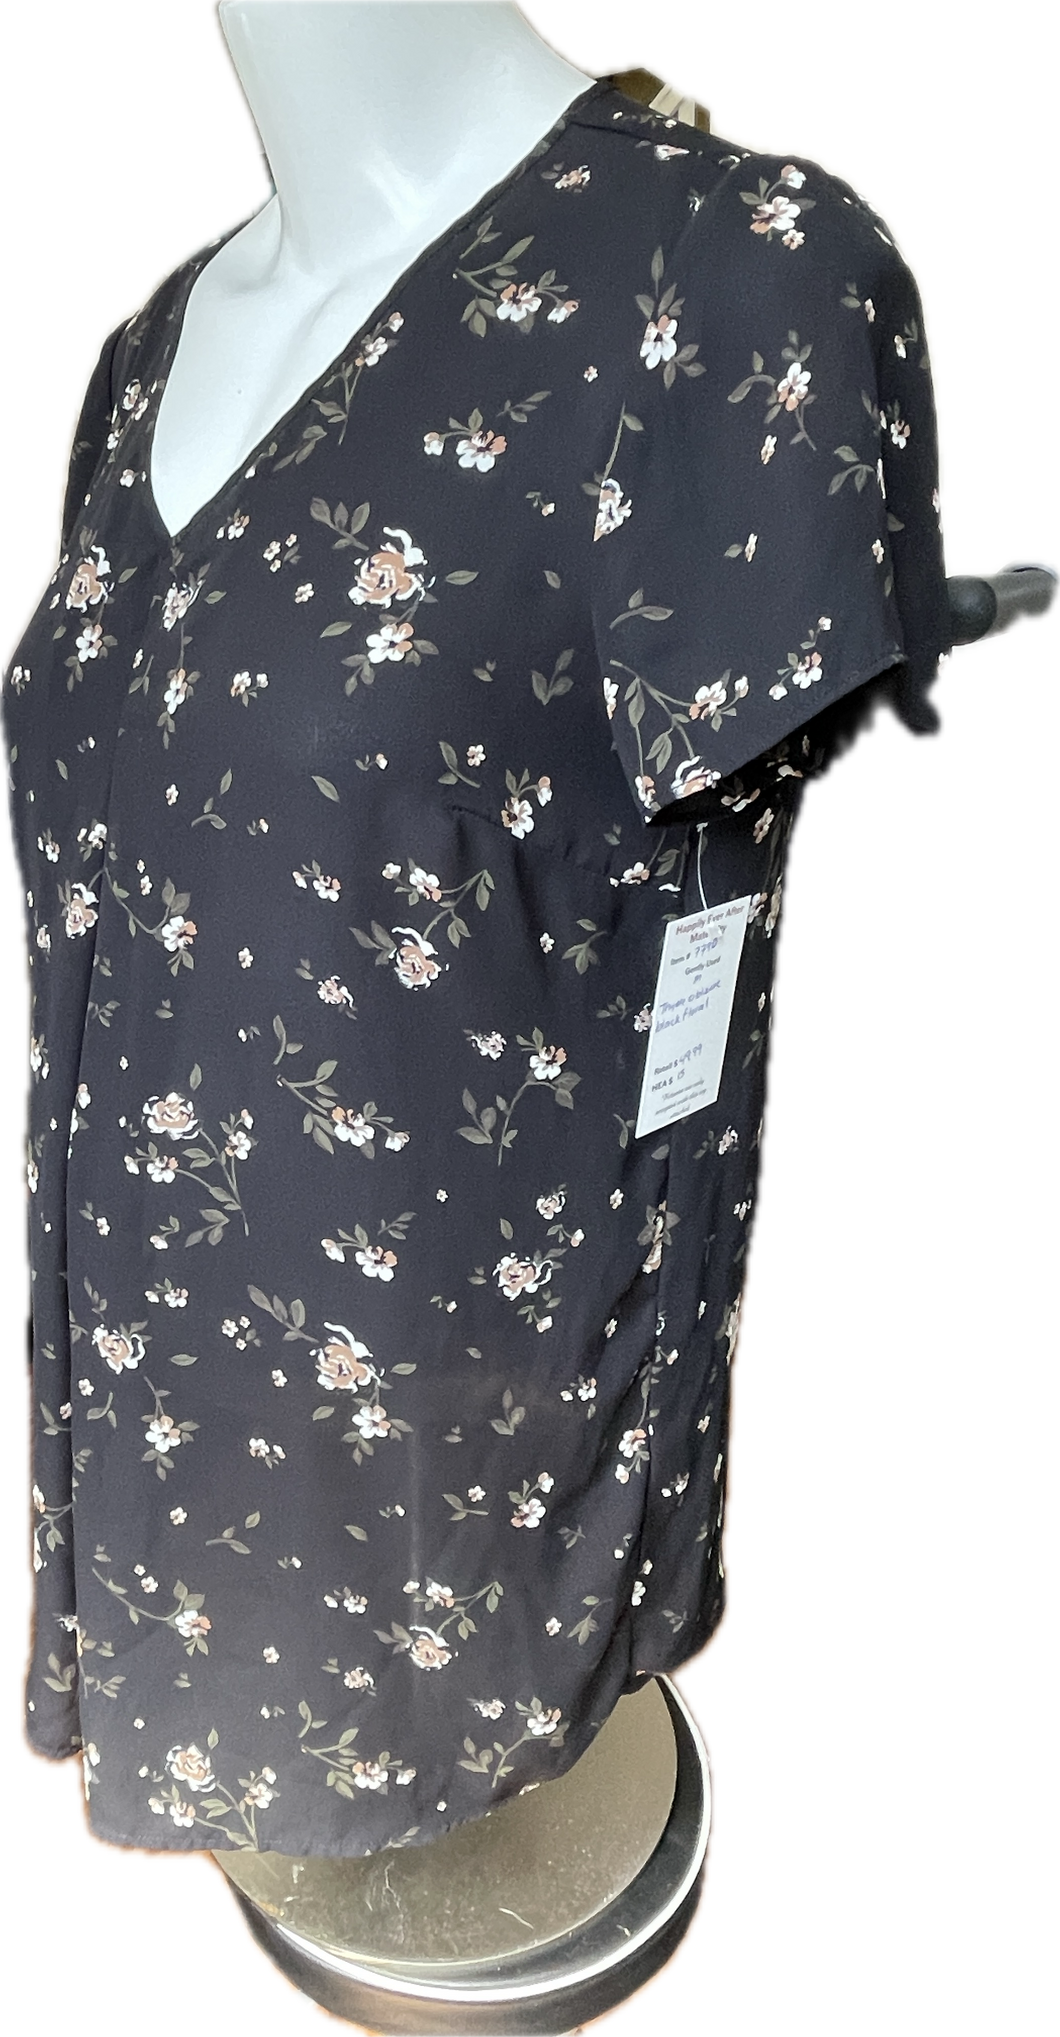 M Thyme Maternity Blouse in Black Floral